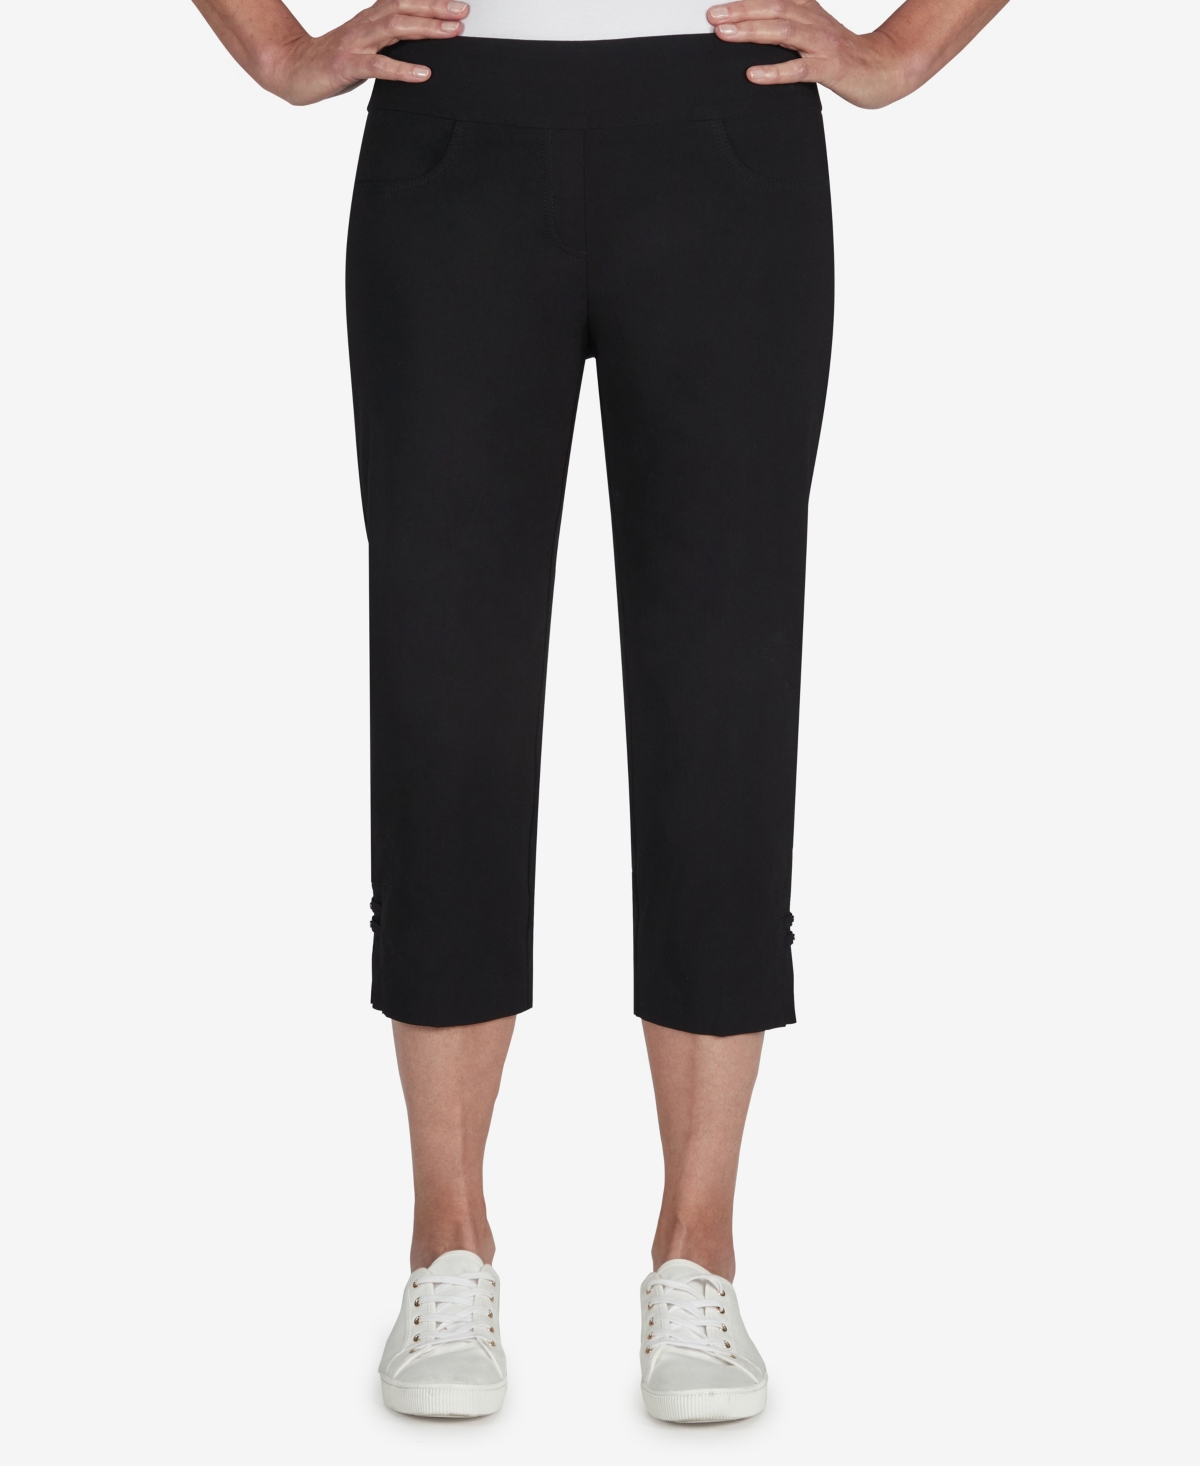 Hearts Of Palm Plus Size Essentials Solid Pull-on Capri Pants With Detailed Split Hem In Black